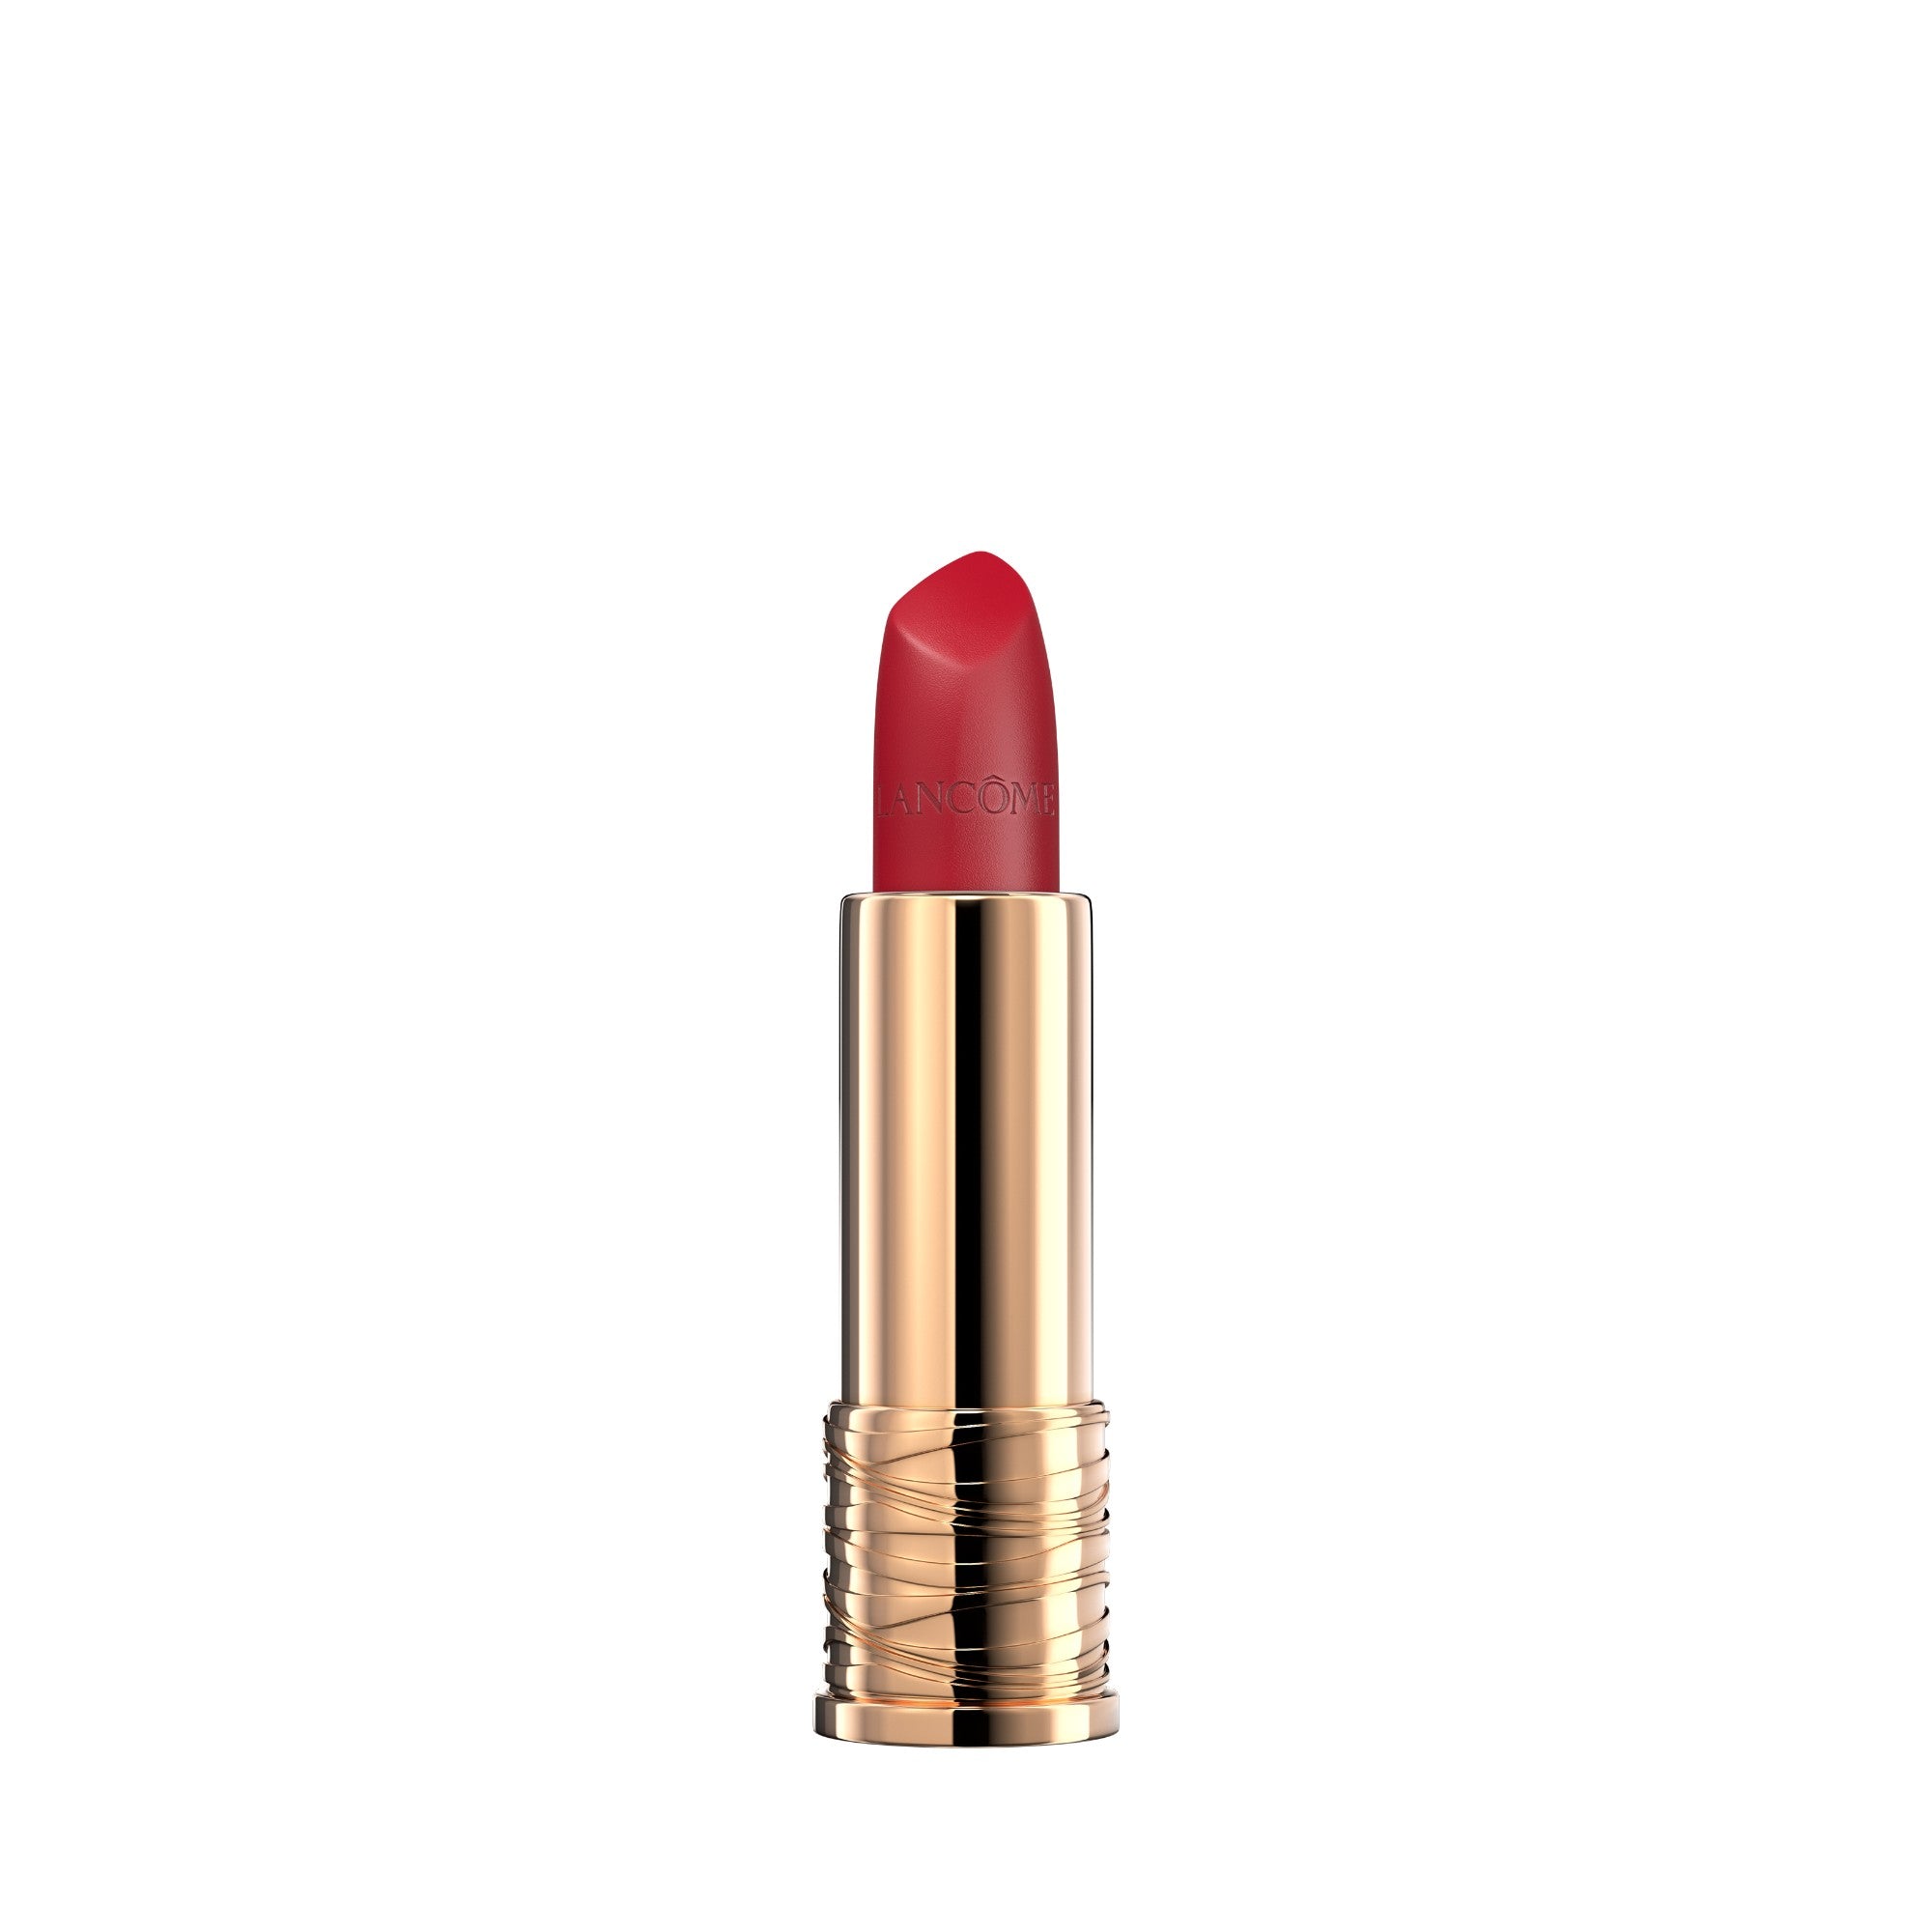 Lancome Absolu Rouge Cream Lipstick Rouge Pigalle Open